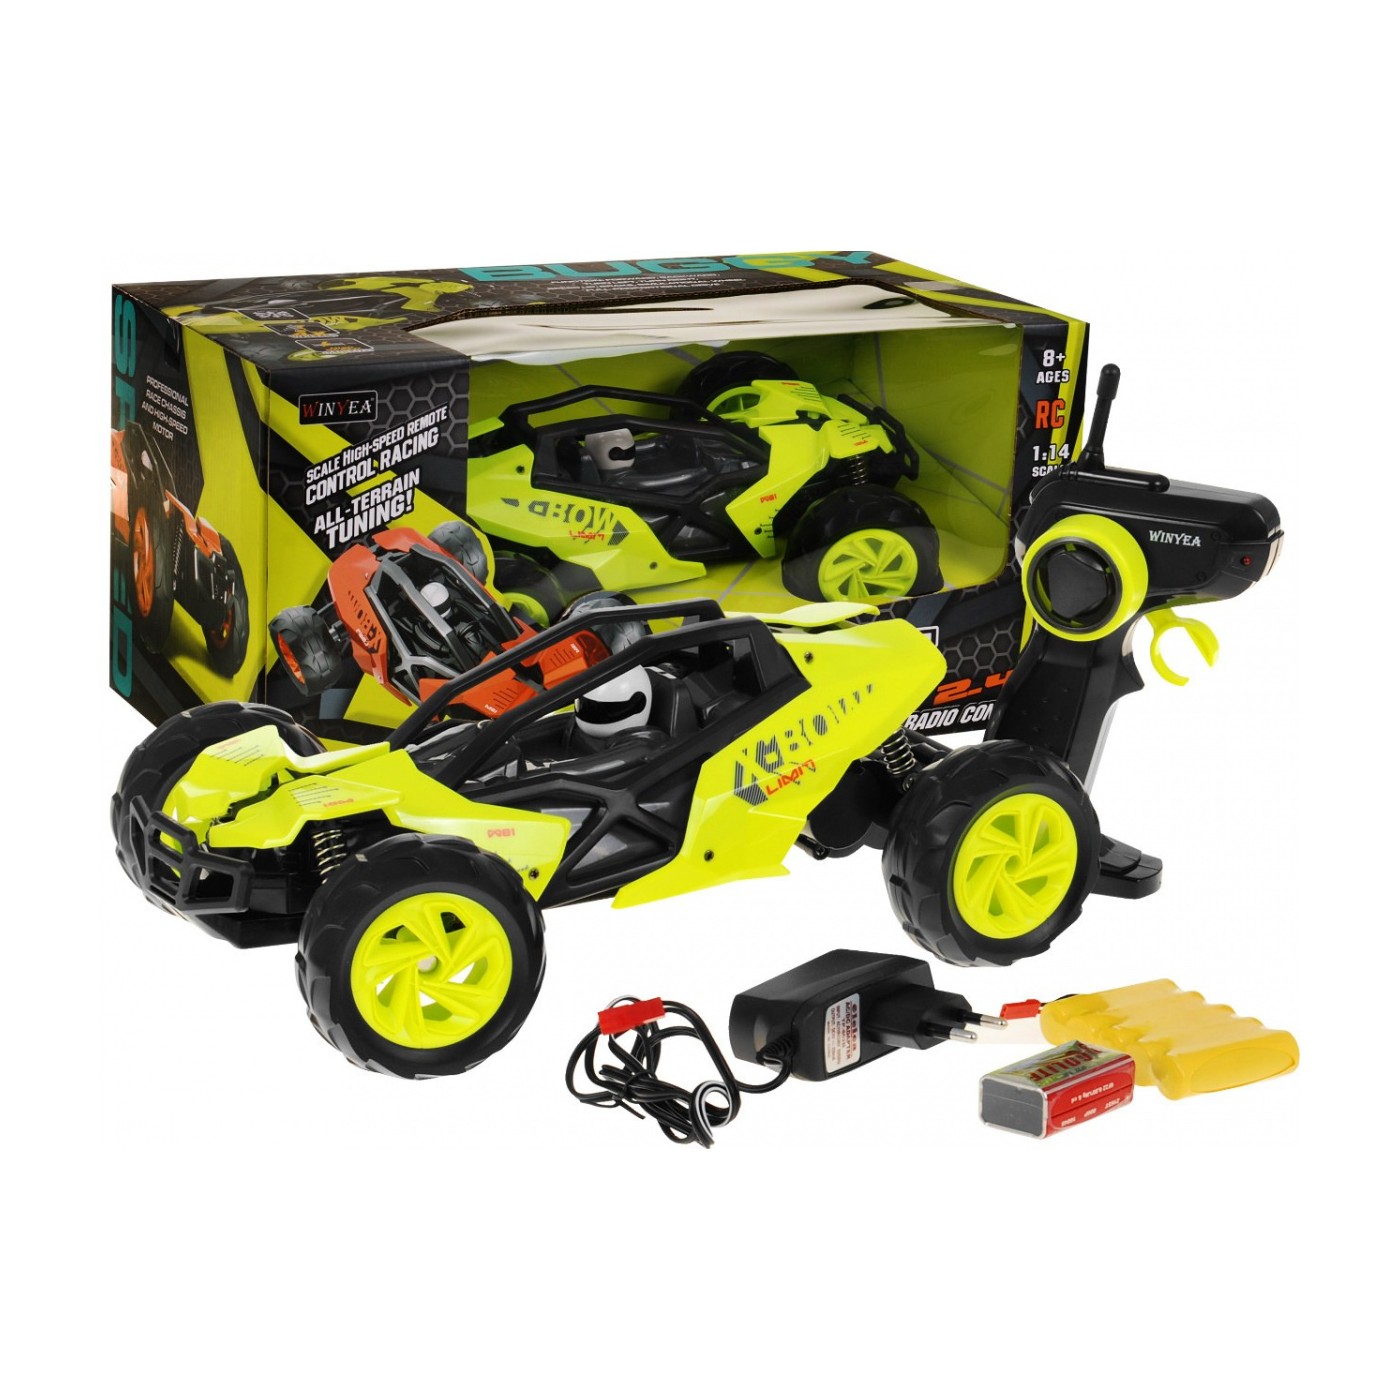 R C Buggy 2 4 G WINYEA 1 14 Green